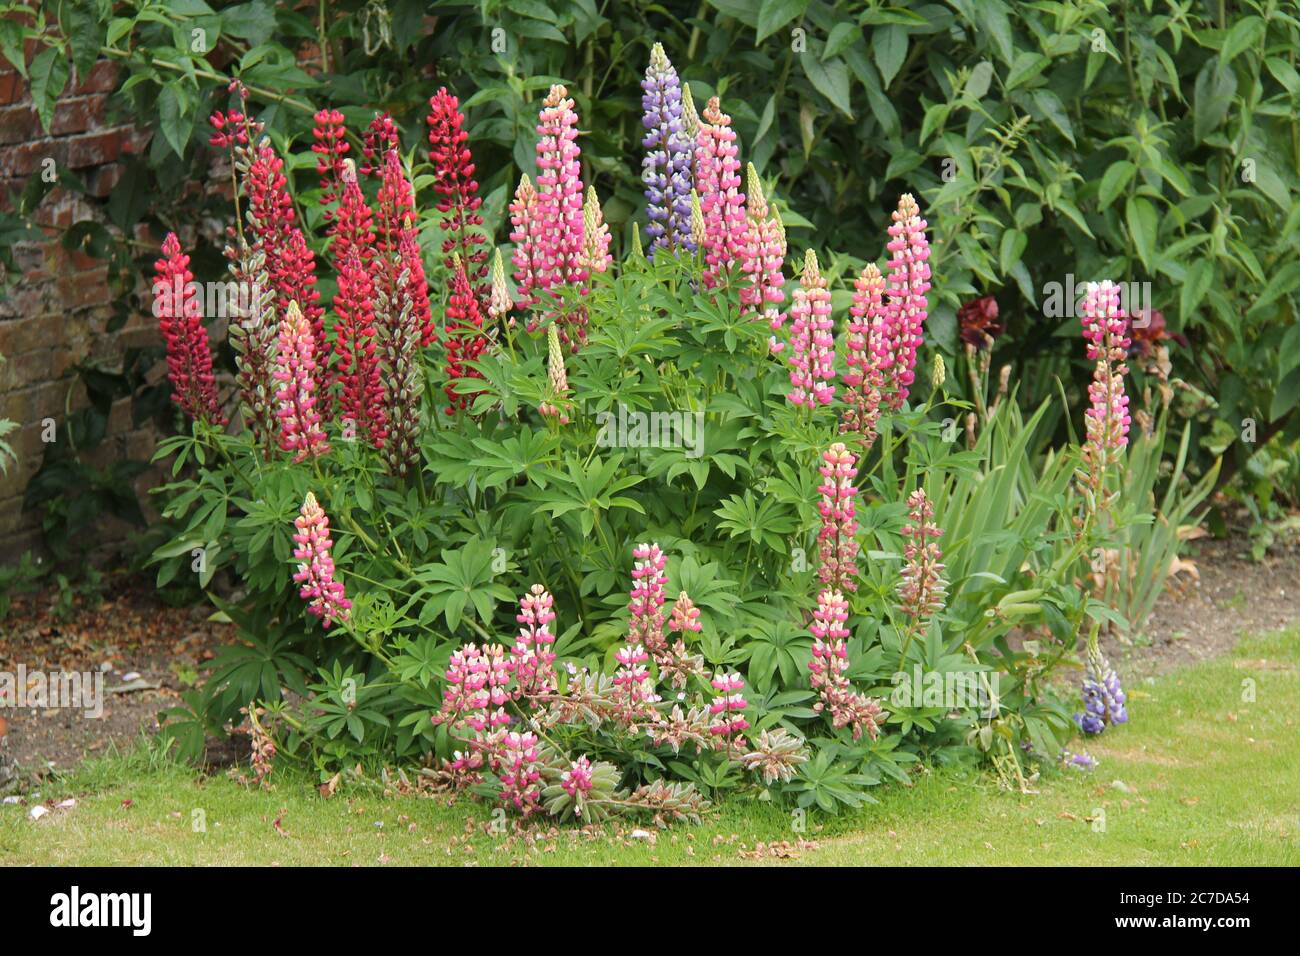 A Beautiful Display of Mixed Lupin Plant Flowers. Stock Photo